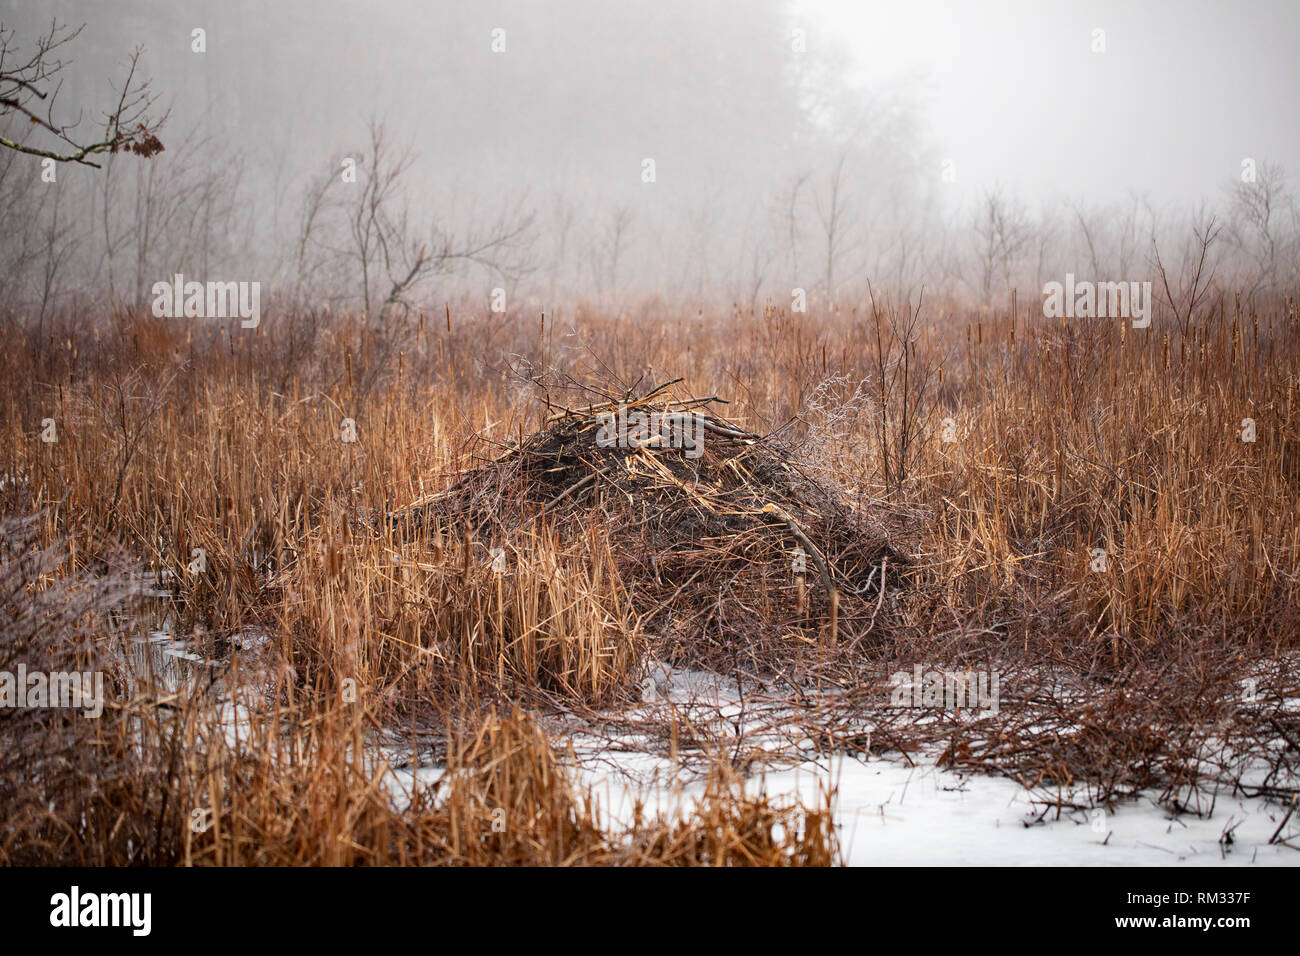 A beaver dam (also known as a lodge or impoundment) in a pond on a foggy winter morning in Westford, Massachusetts, USA. Stock Photo